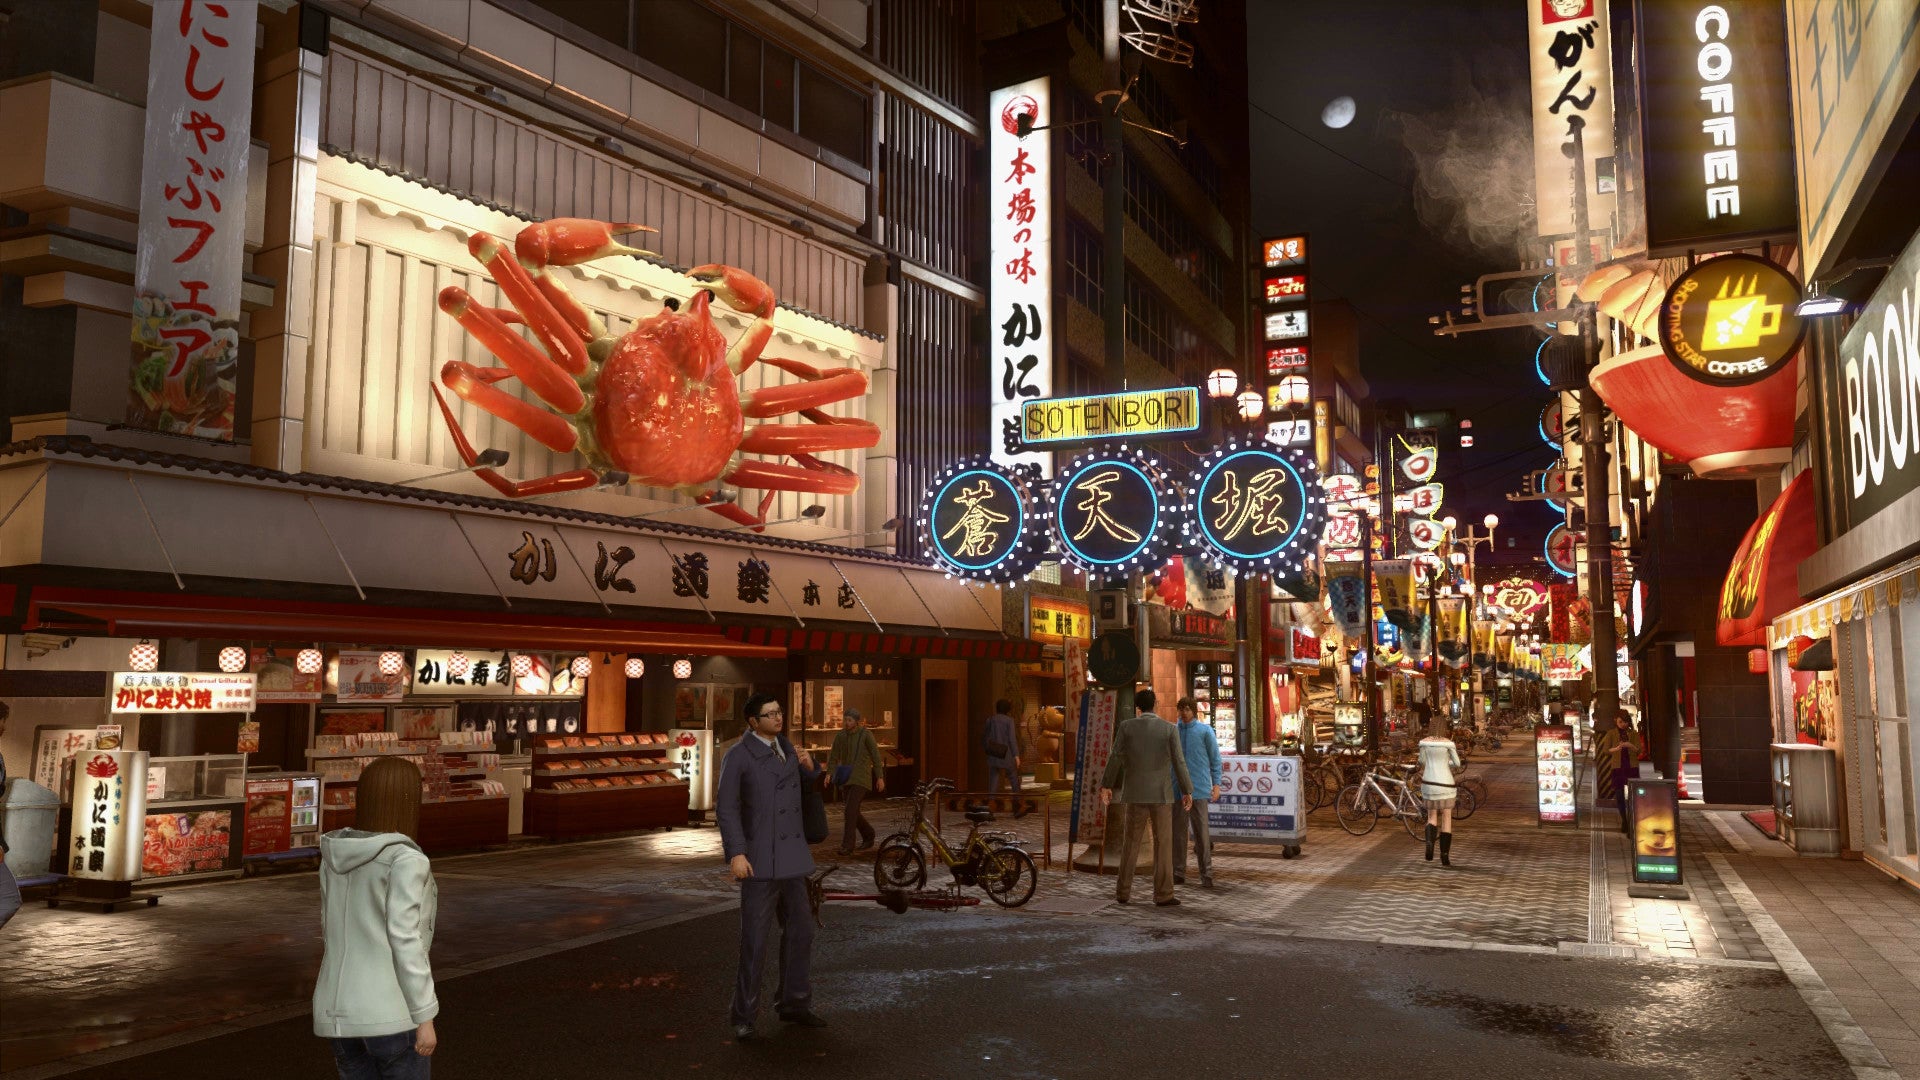 THe neon-lit streets of Sotenbori, with all its restaurants and cafes, from Yakuza Kiwami 2.